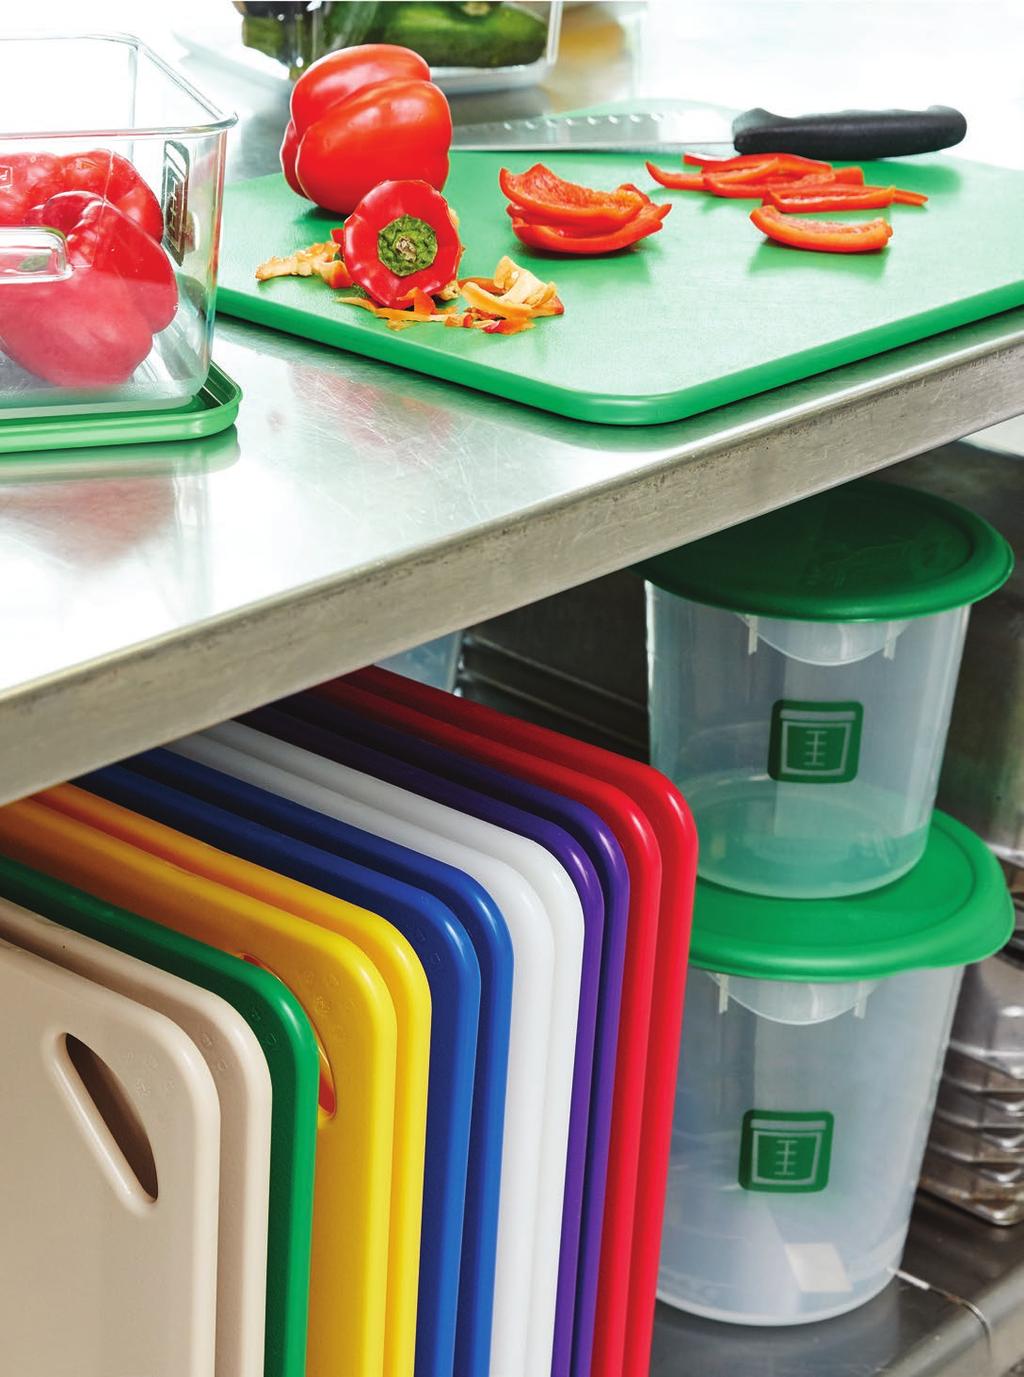 SAFELY MANAGE YOUR FLOW OF FOOD From storage to prep tools, you'll have what you need to help minimize cross-contamination through four stages of the flow of food.